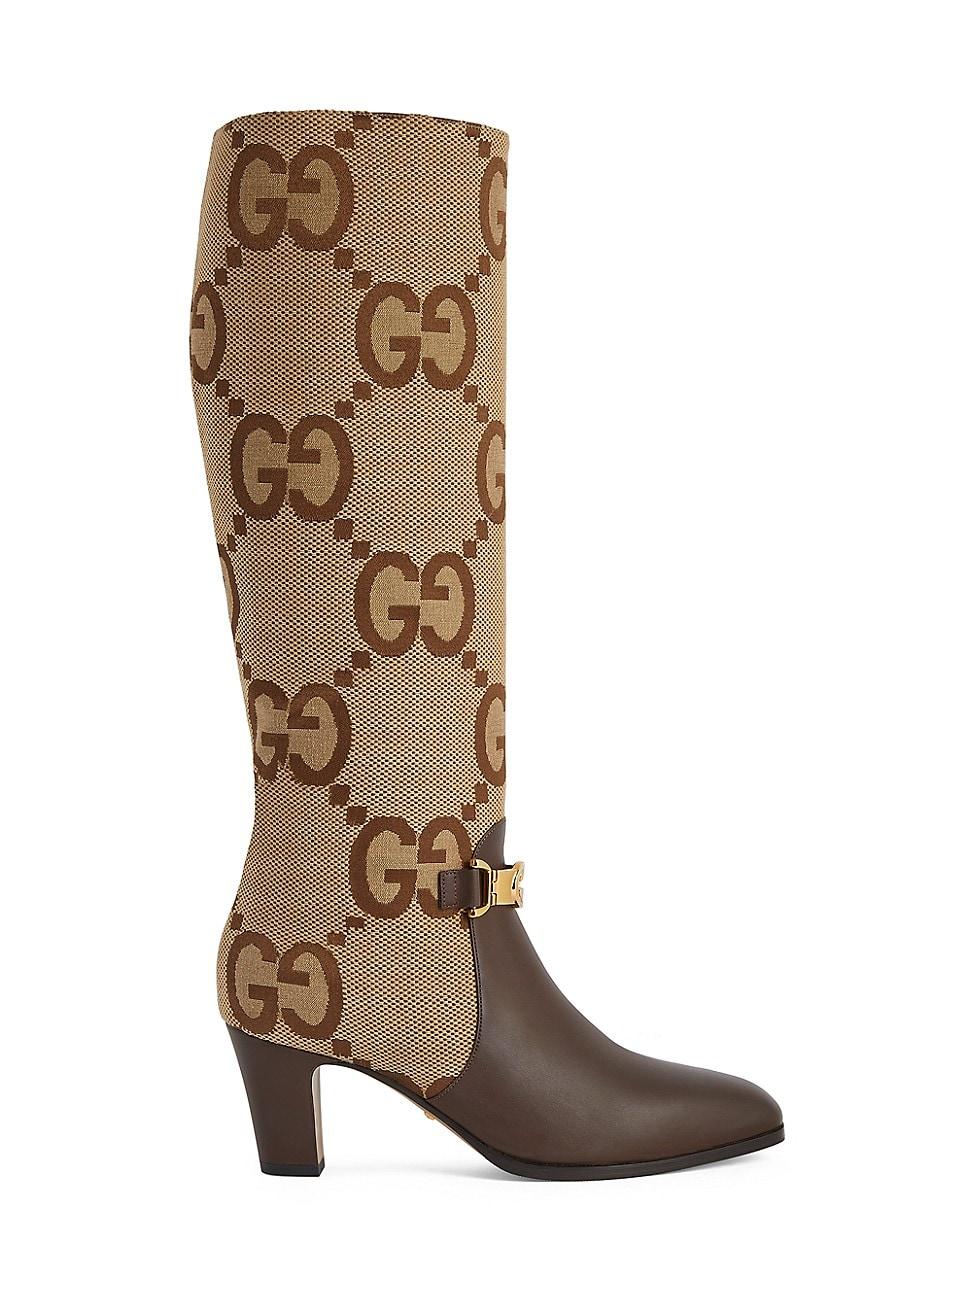 Gucci Anna GG Canvas Knee-high Boots in Natural | Lyst